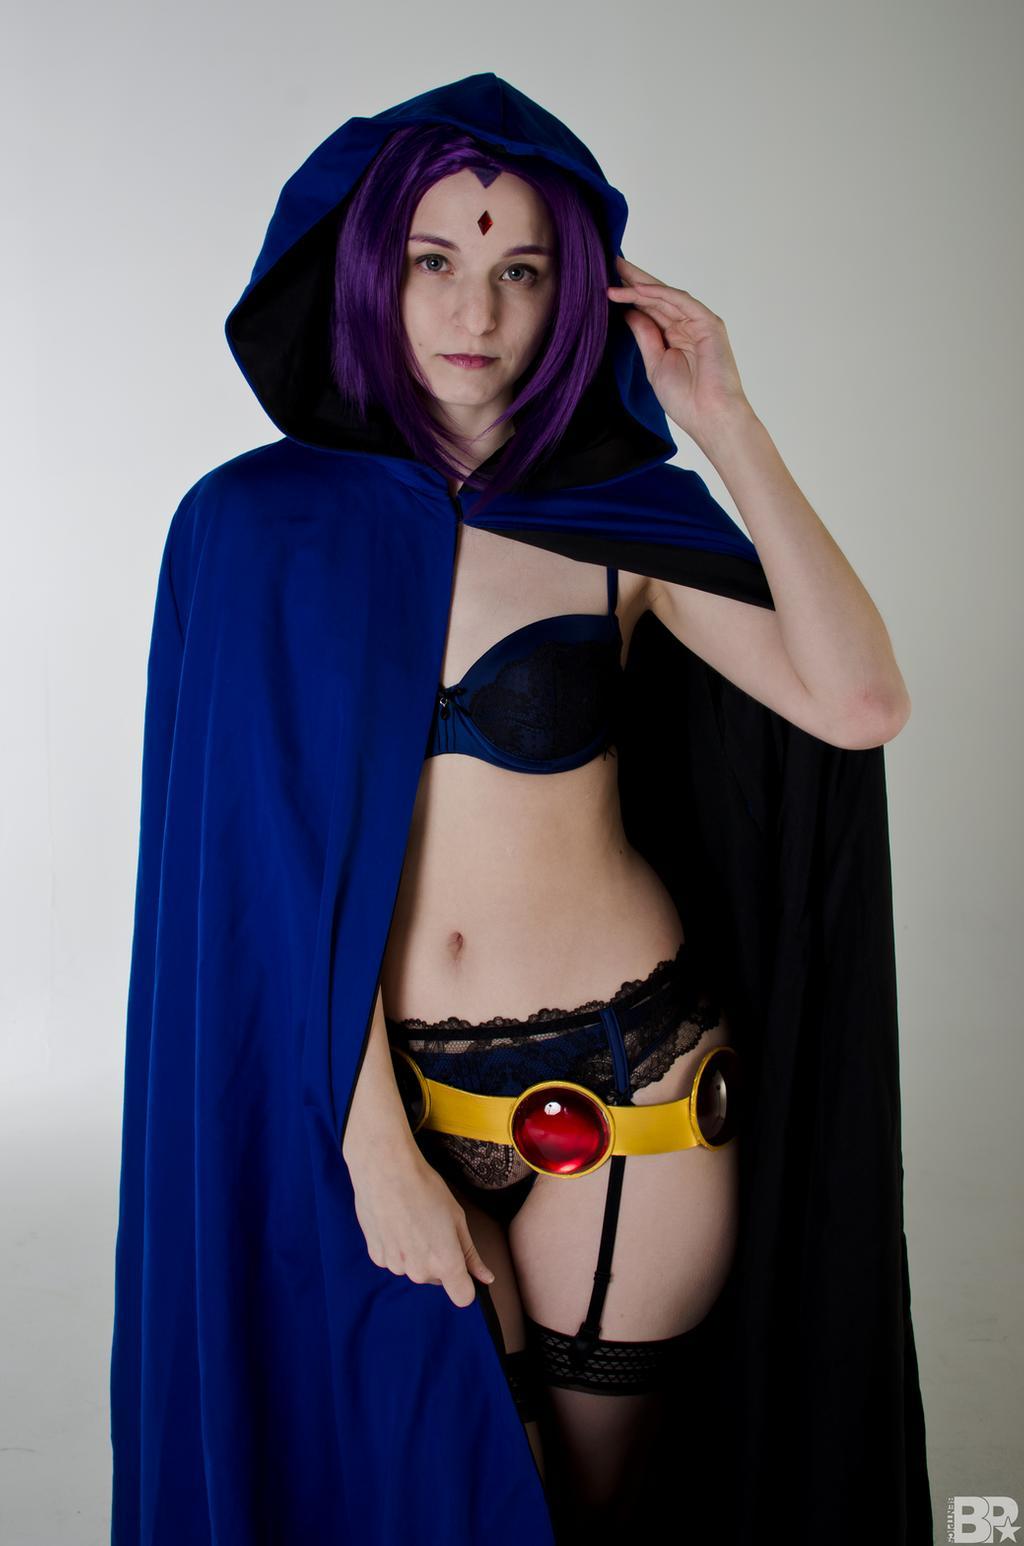 50+ Hot Pictures Of Raven From Teen Titans, DC Comics. 9